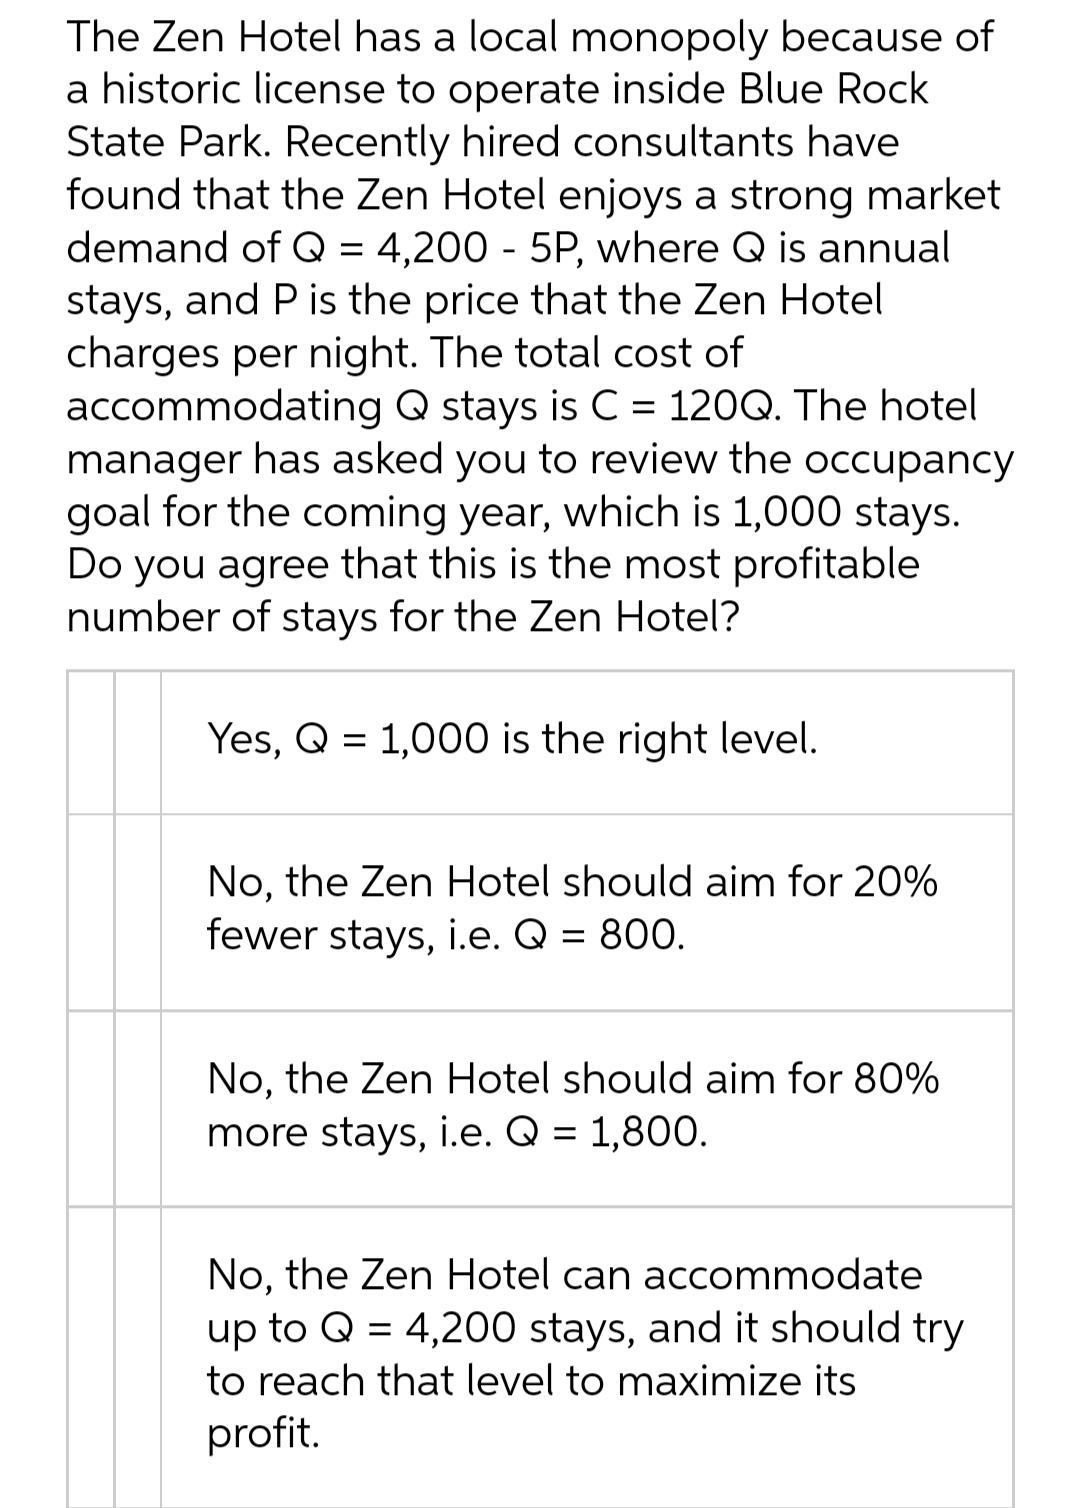 The Zen Hotel has a local monopoly because of
a historic license to operate inside Blue Rock
State Park. Recently hired consultants have
found that the Zen Hotel enjoys a strong market
demand of Q = 4,200 - 5P, where Q is annual
stays, and P is the price that the Zen Hotel
charges per night. The total cost of
accommodating Q stays is C = 120Q. The hotel
manager has asked you to review the occupancy
goal for the coming year, which is 1,000 stays.
Do you agree that this is the most profitable
number of stays for the Zen Hotel?
%3D
Yes, Q = 1,000 is the right level.
%3D
No, the Zen Hotel should aim for 20%
fewer stays, i.e. Q = 800.
No, the Zen Hotel should aim for 80%
more stays, i.e. Q = 1,80O.
No, the Zen Hotel can accommodate
up to Q = 4,200 stays, and it should try
to reach that level to maximize its
profit.
